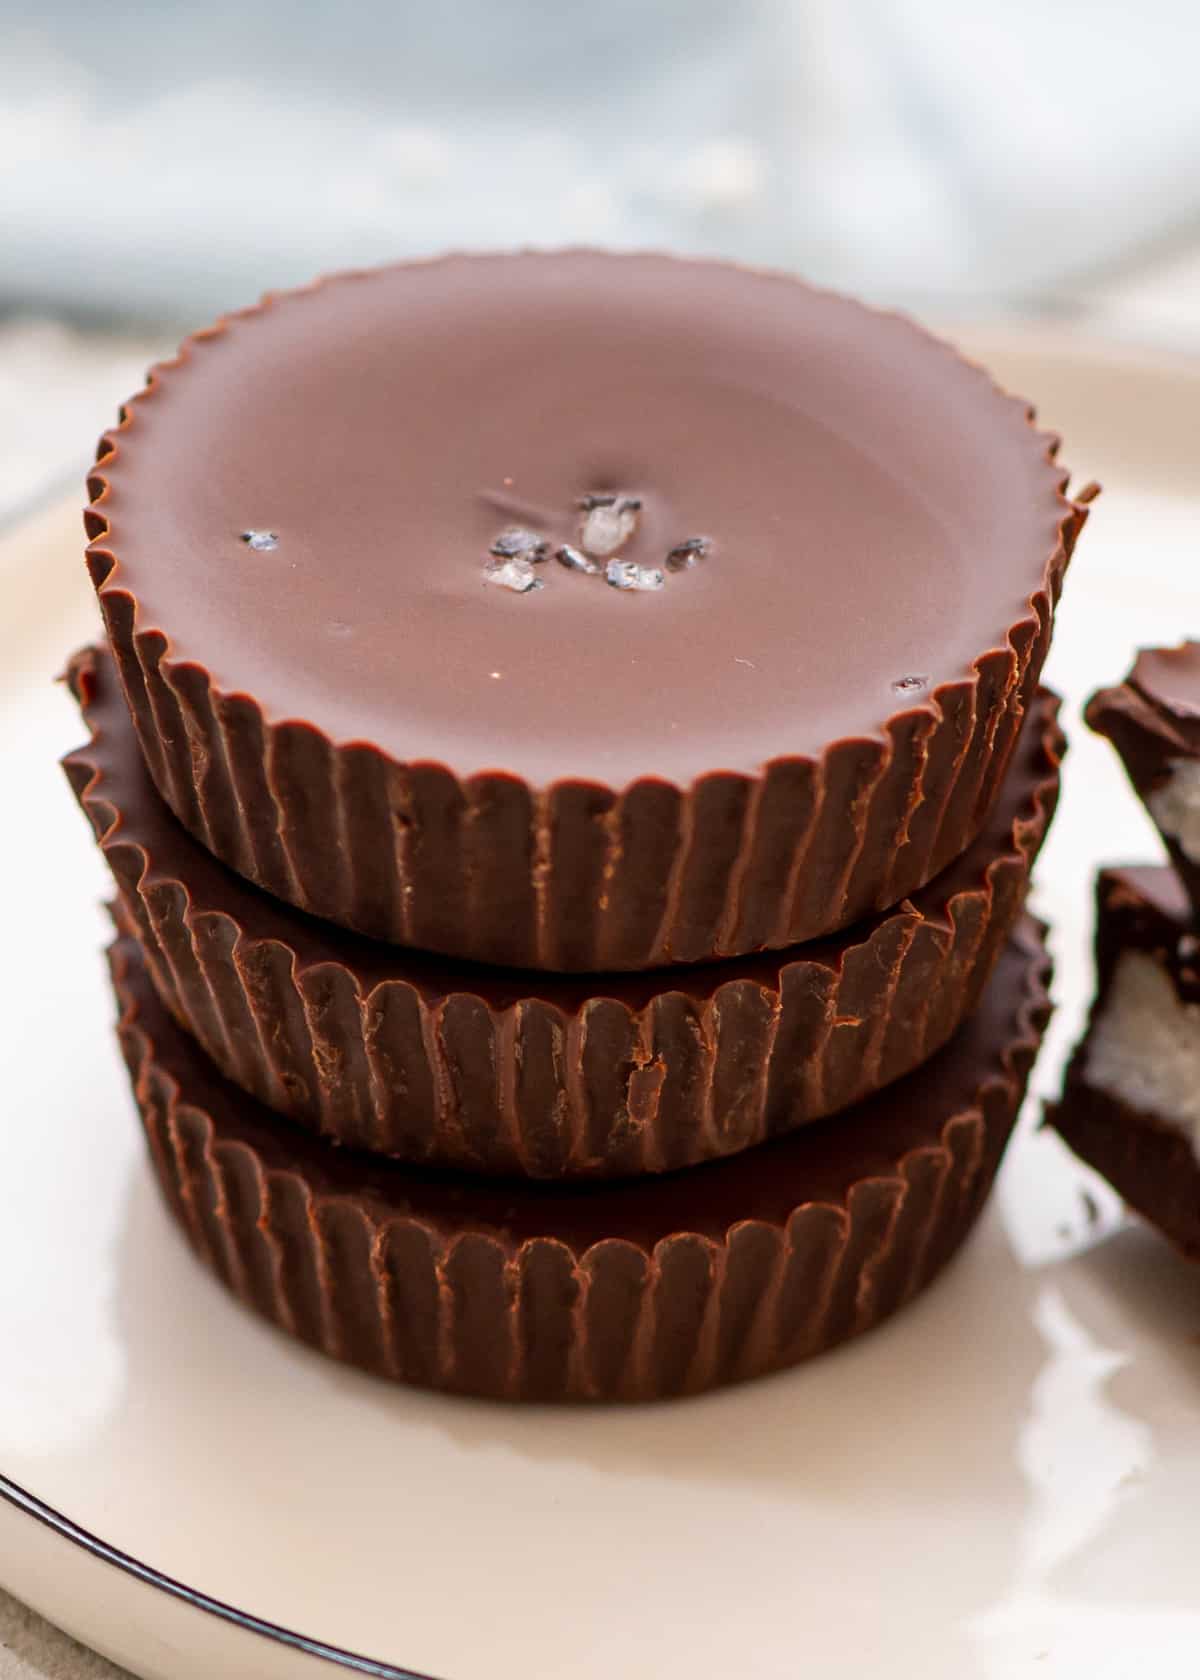 Three mint chocolate cups stacked on top.